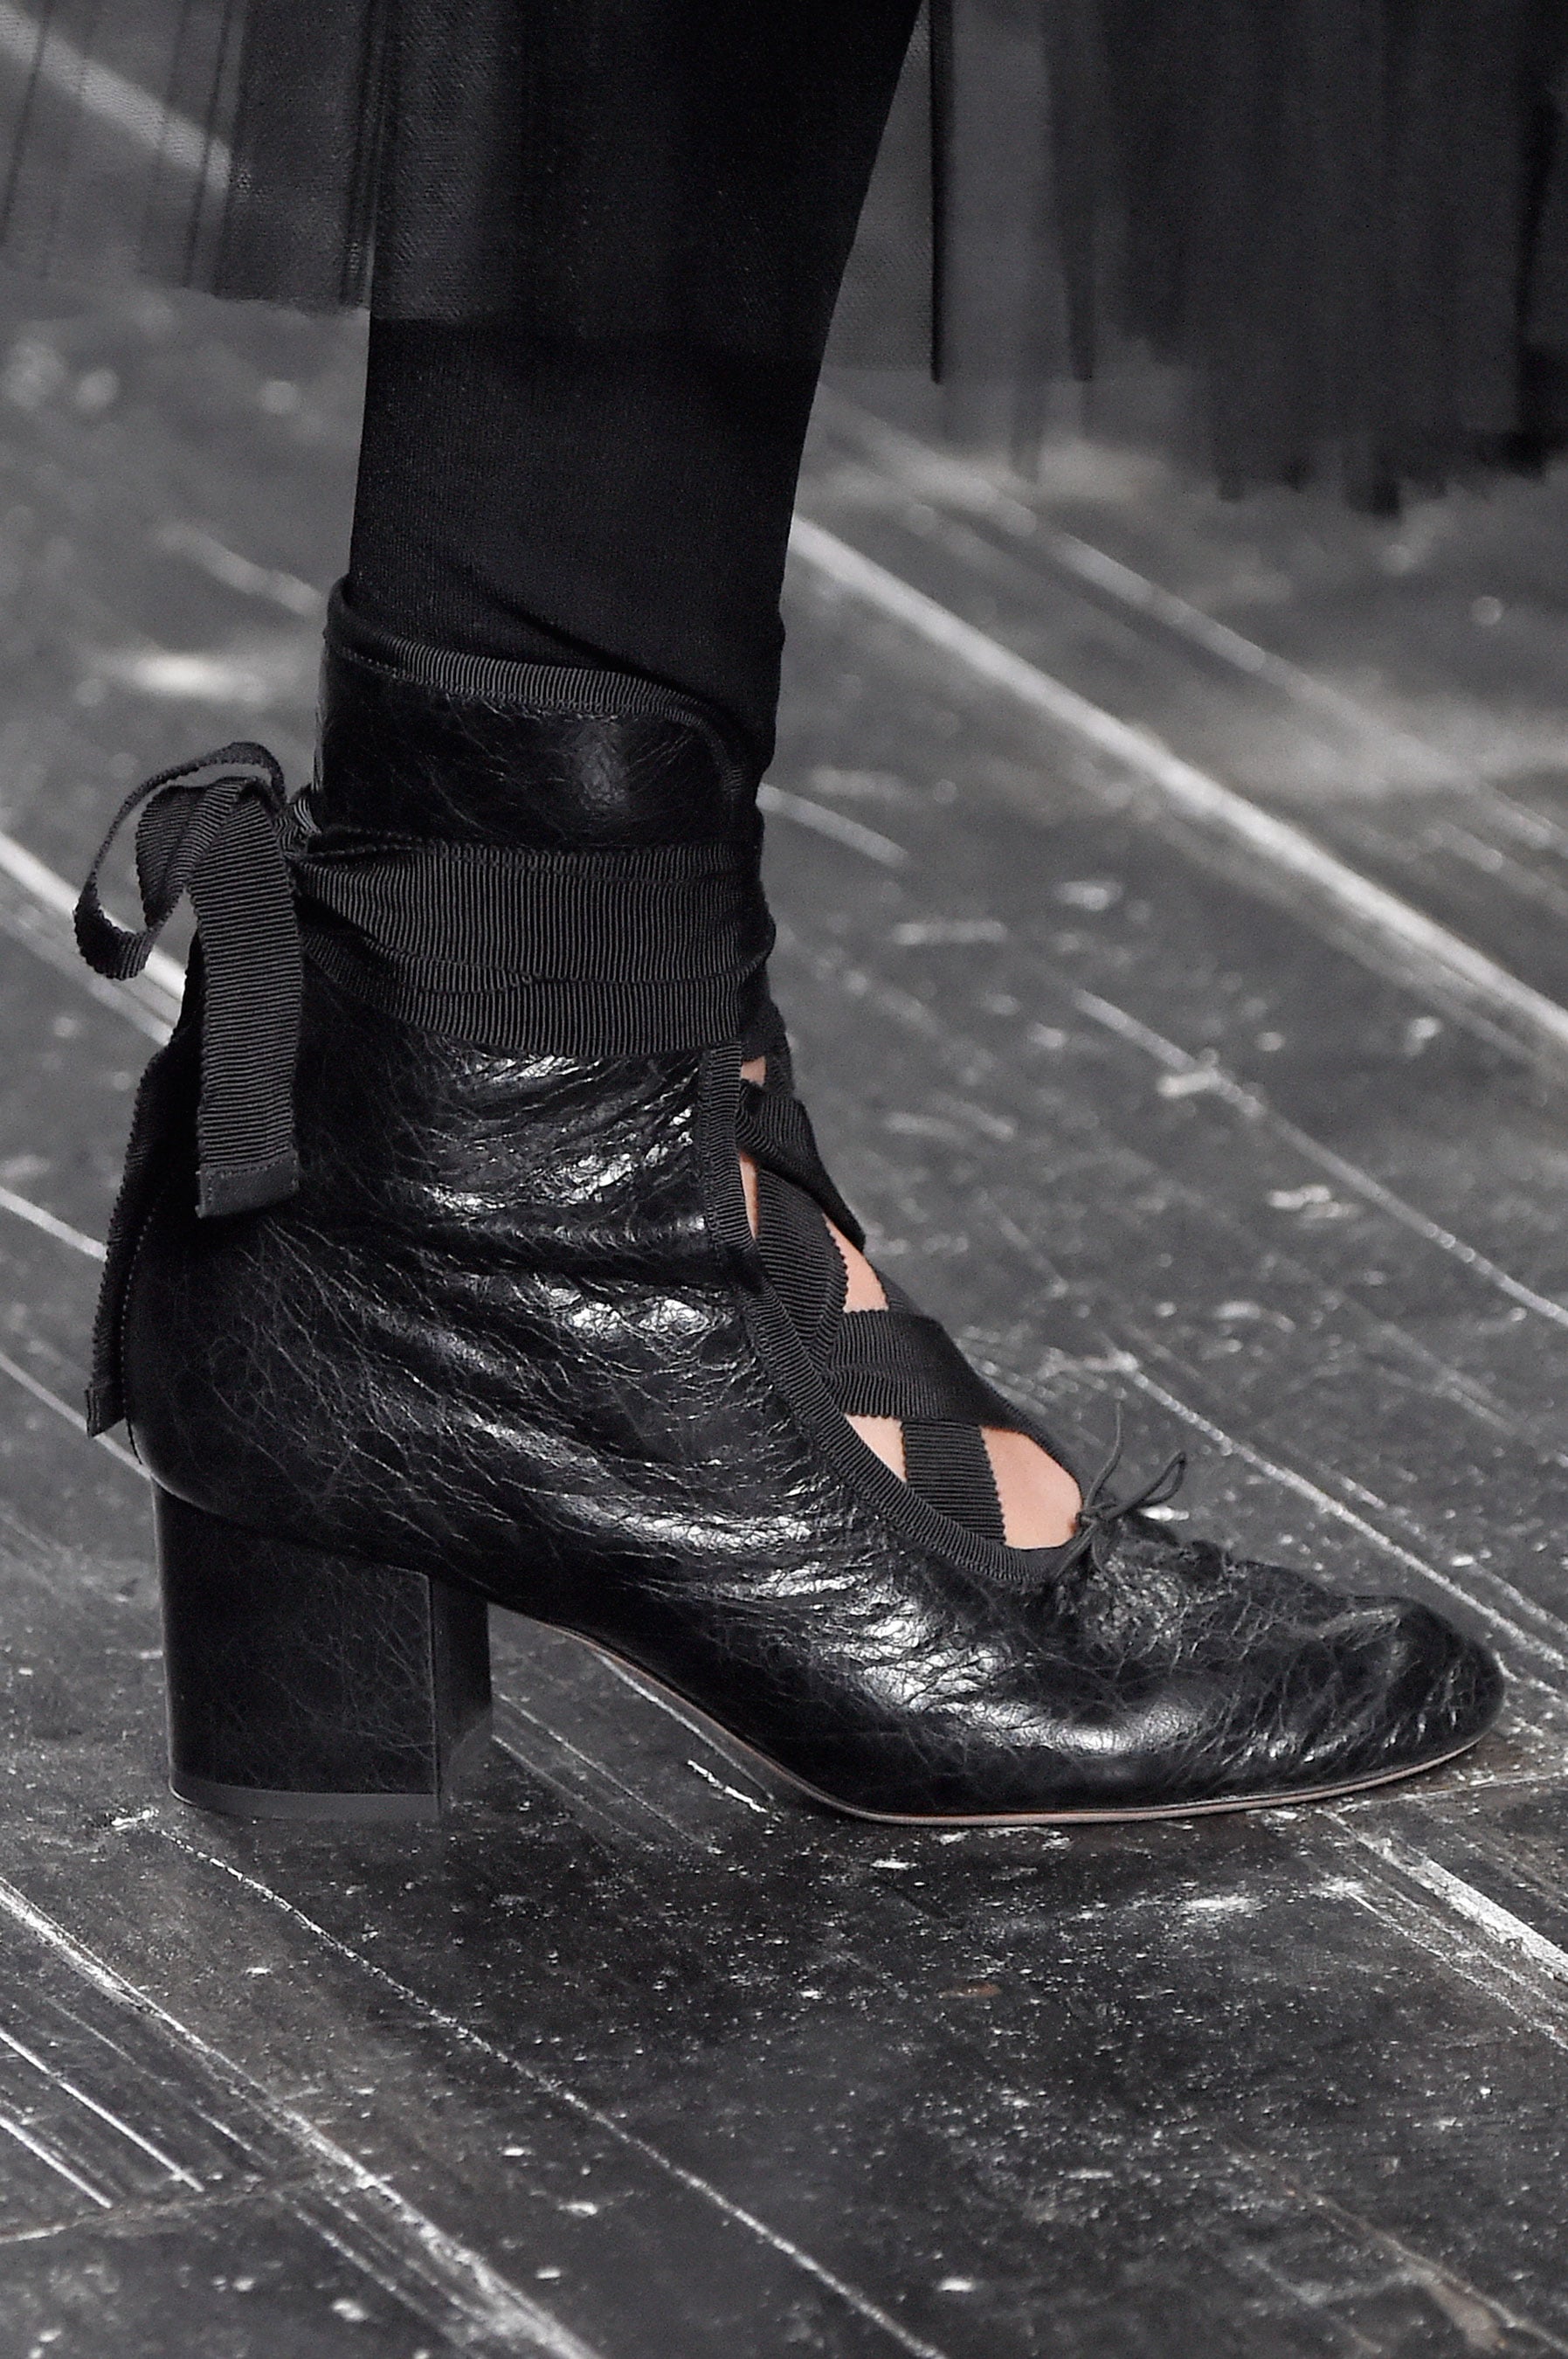 Barcelona Profeet Zachtmoedigheid Valentino Fall 2016 | Check Out the Latest Designer Shoes That Just Walked  the Runway at PFW | POPSUGAR Fashion Photo 5